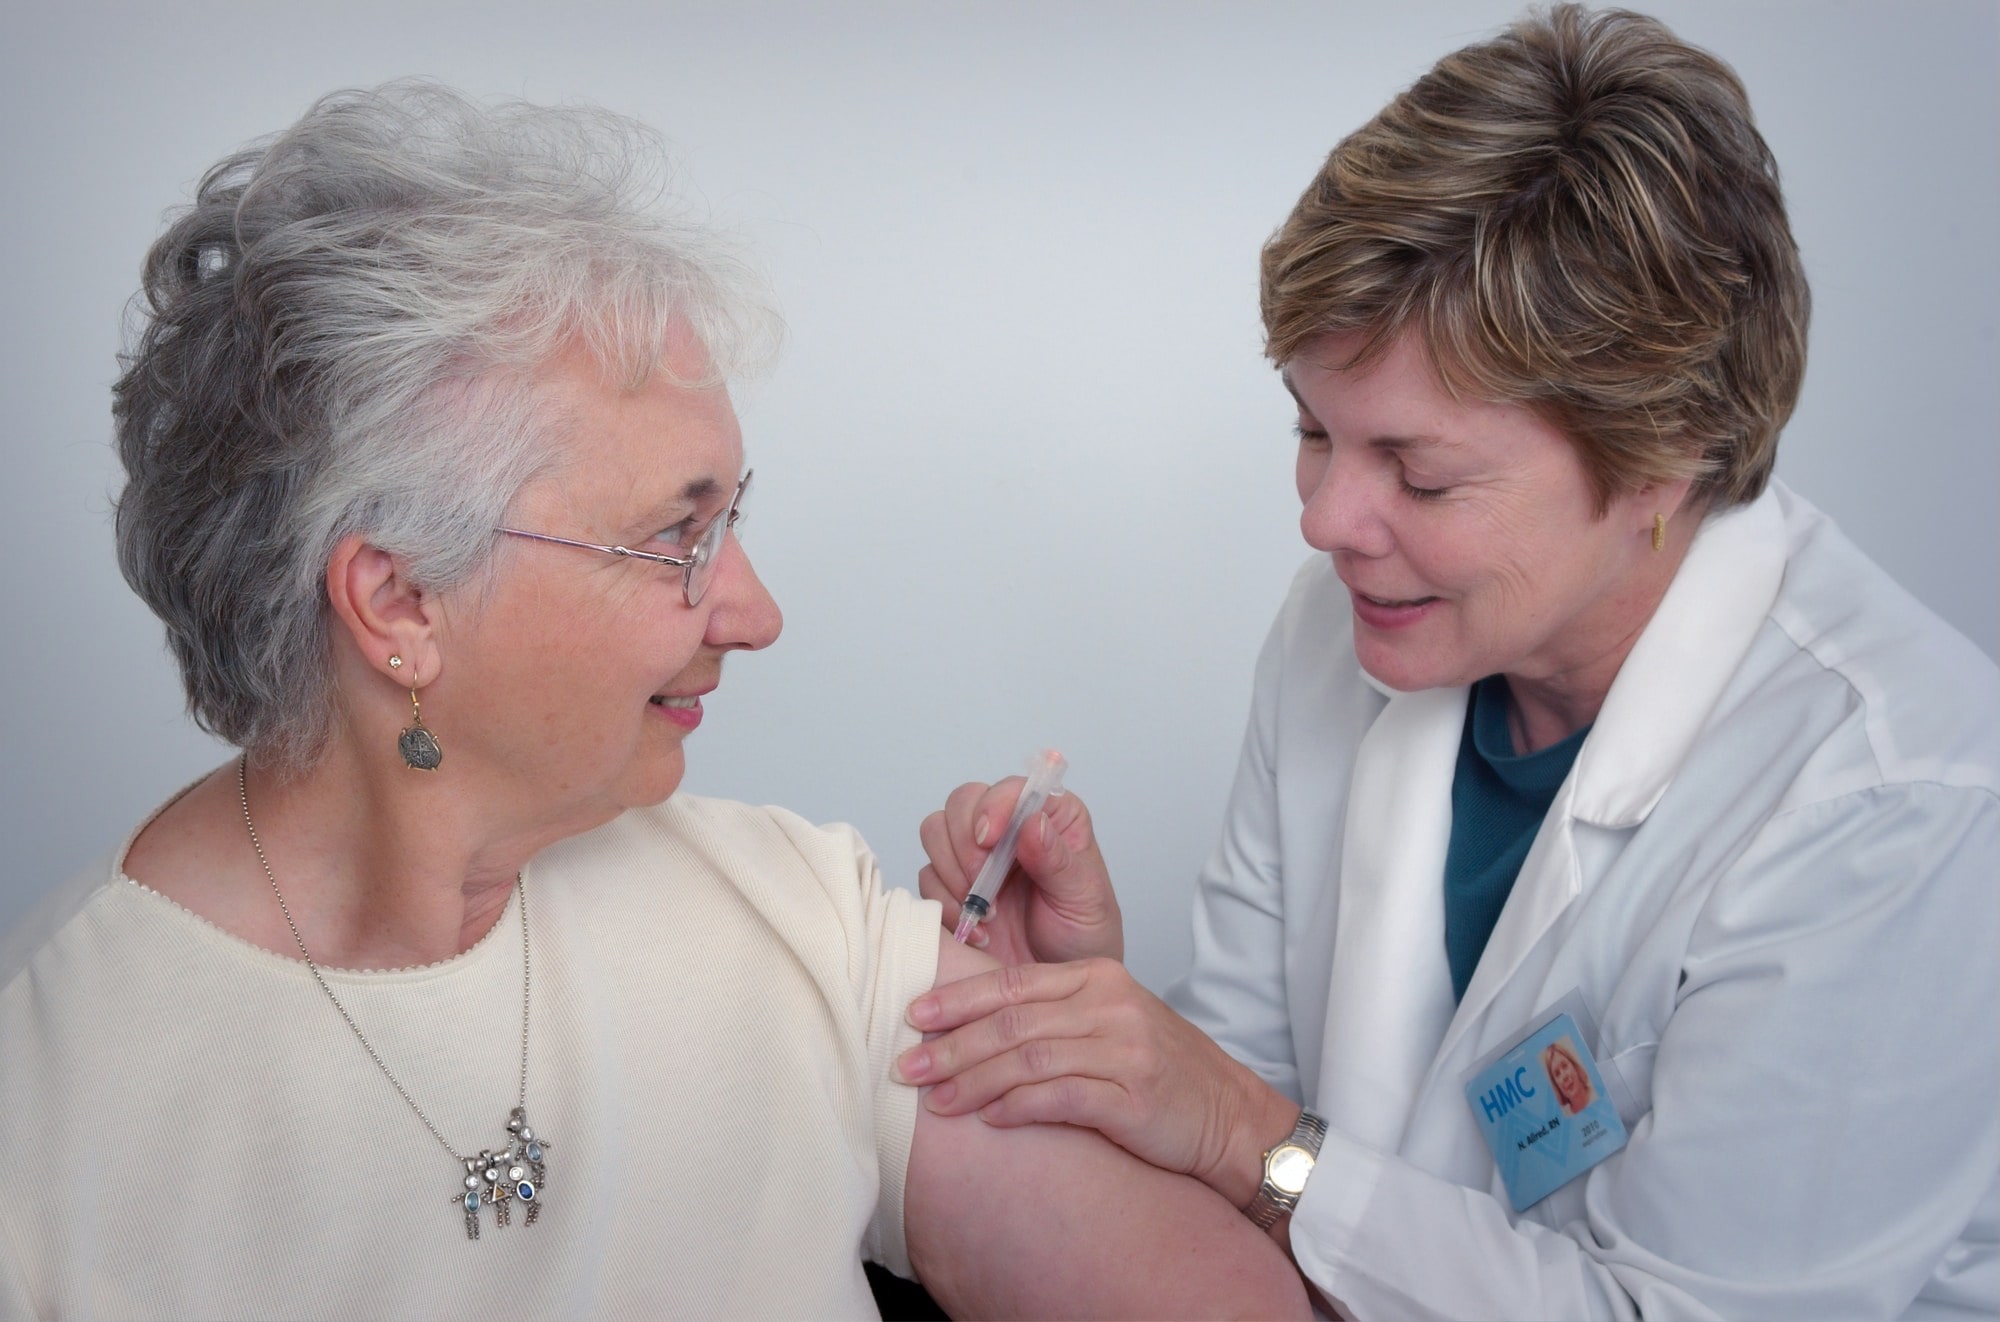 An image with a patient and a nurse administering a needle in her arm